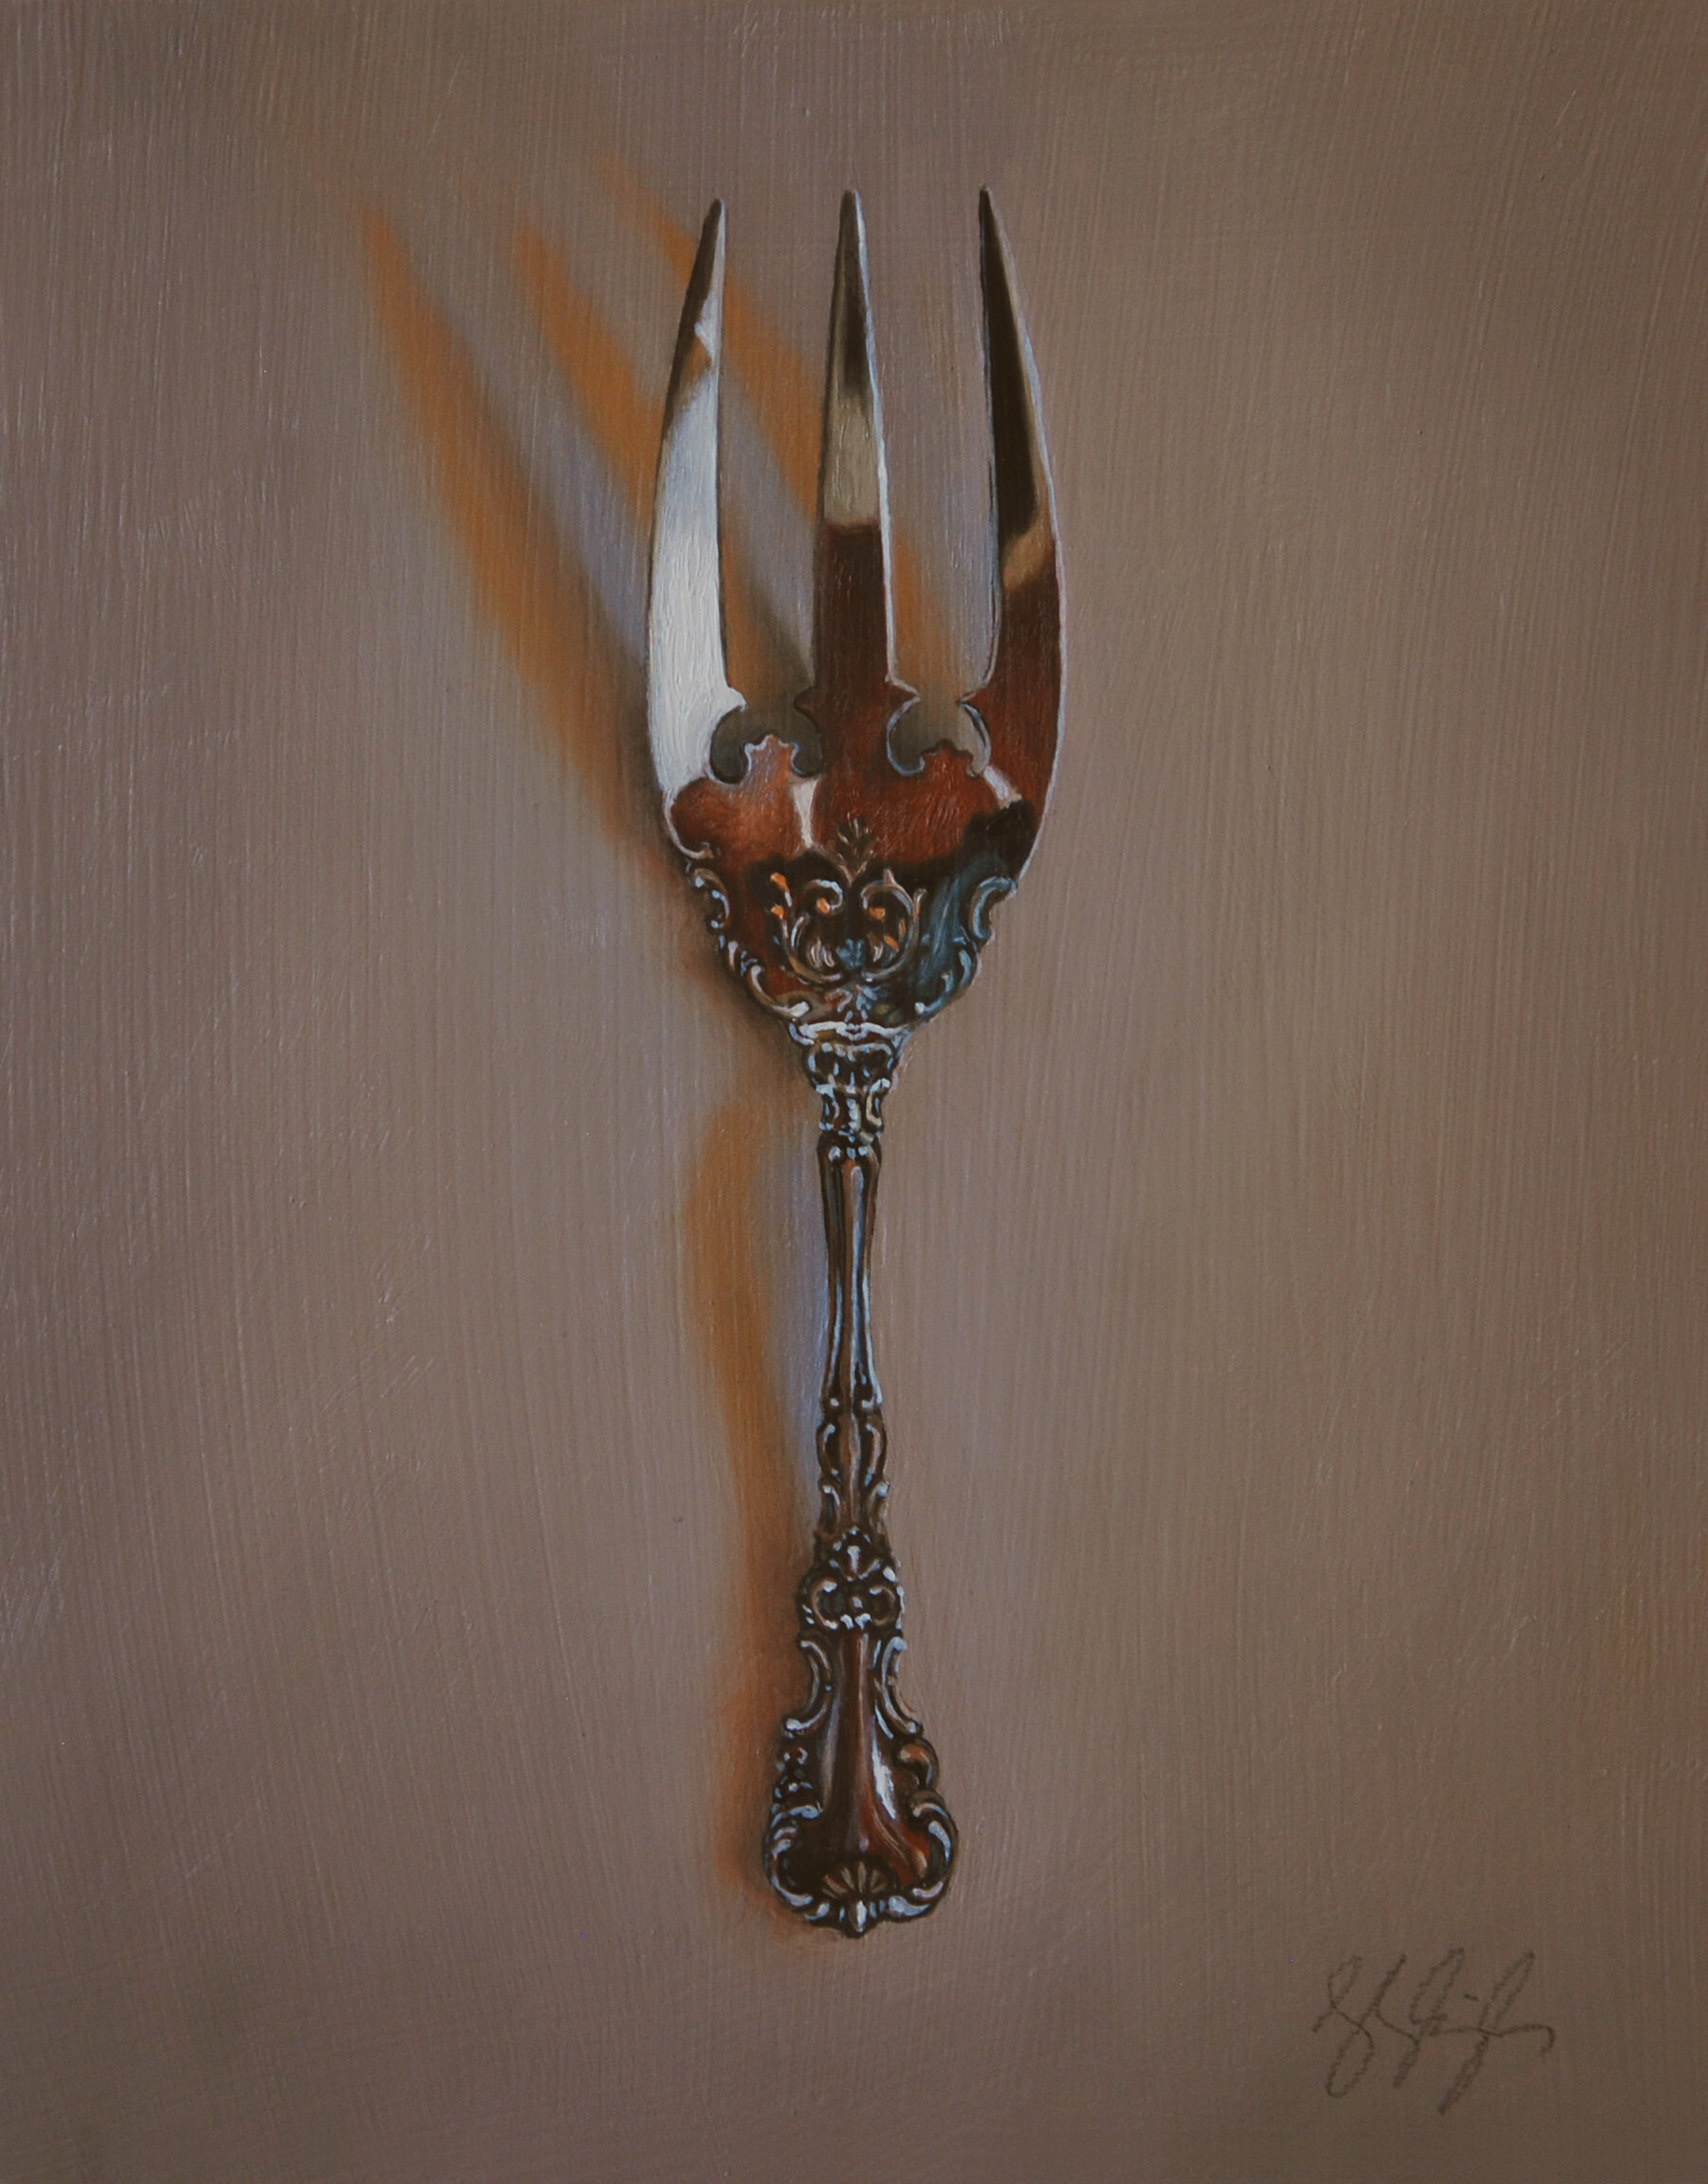   Silver Fork #59, The Judger  Oil on panel, 2020. 5.5x7” 